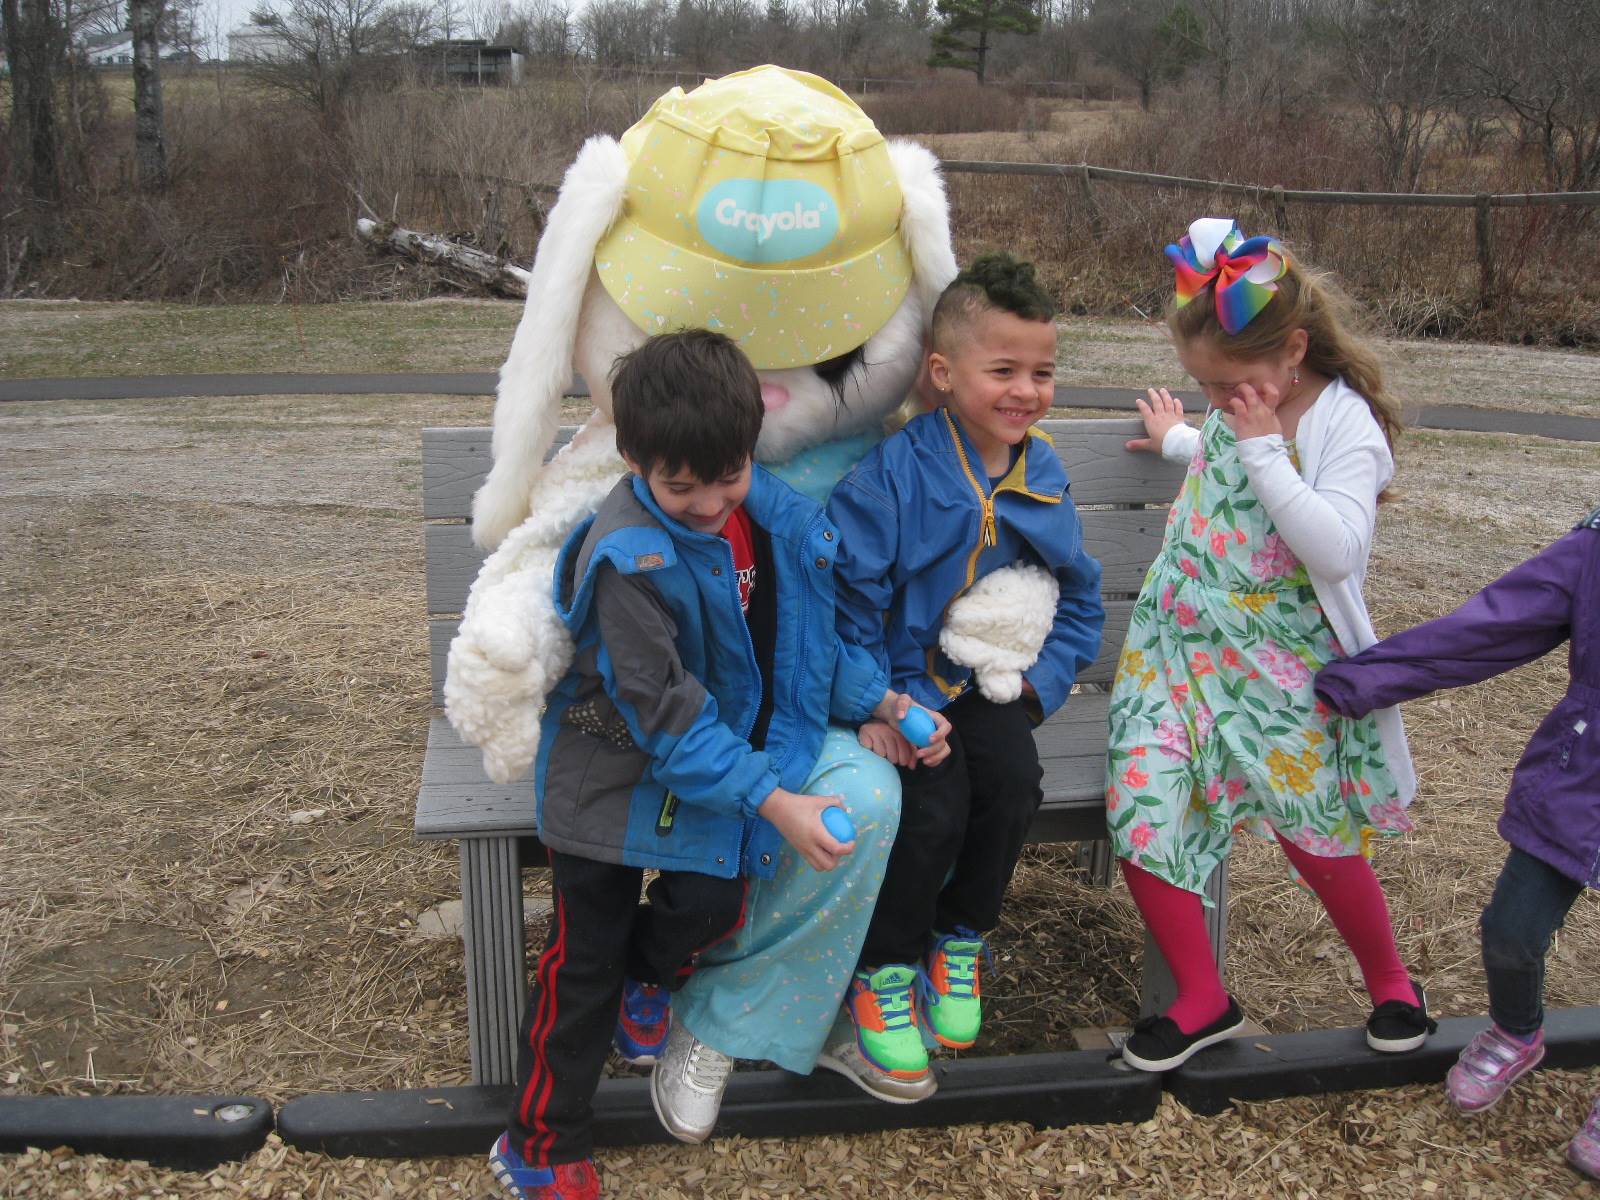 3 students "talk" with Easter Bunny.